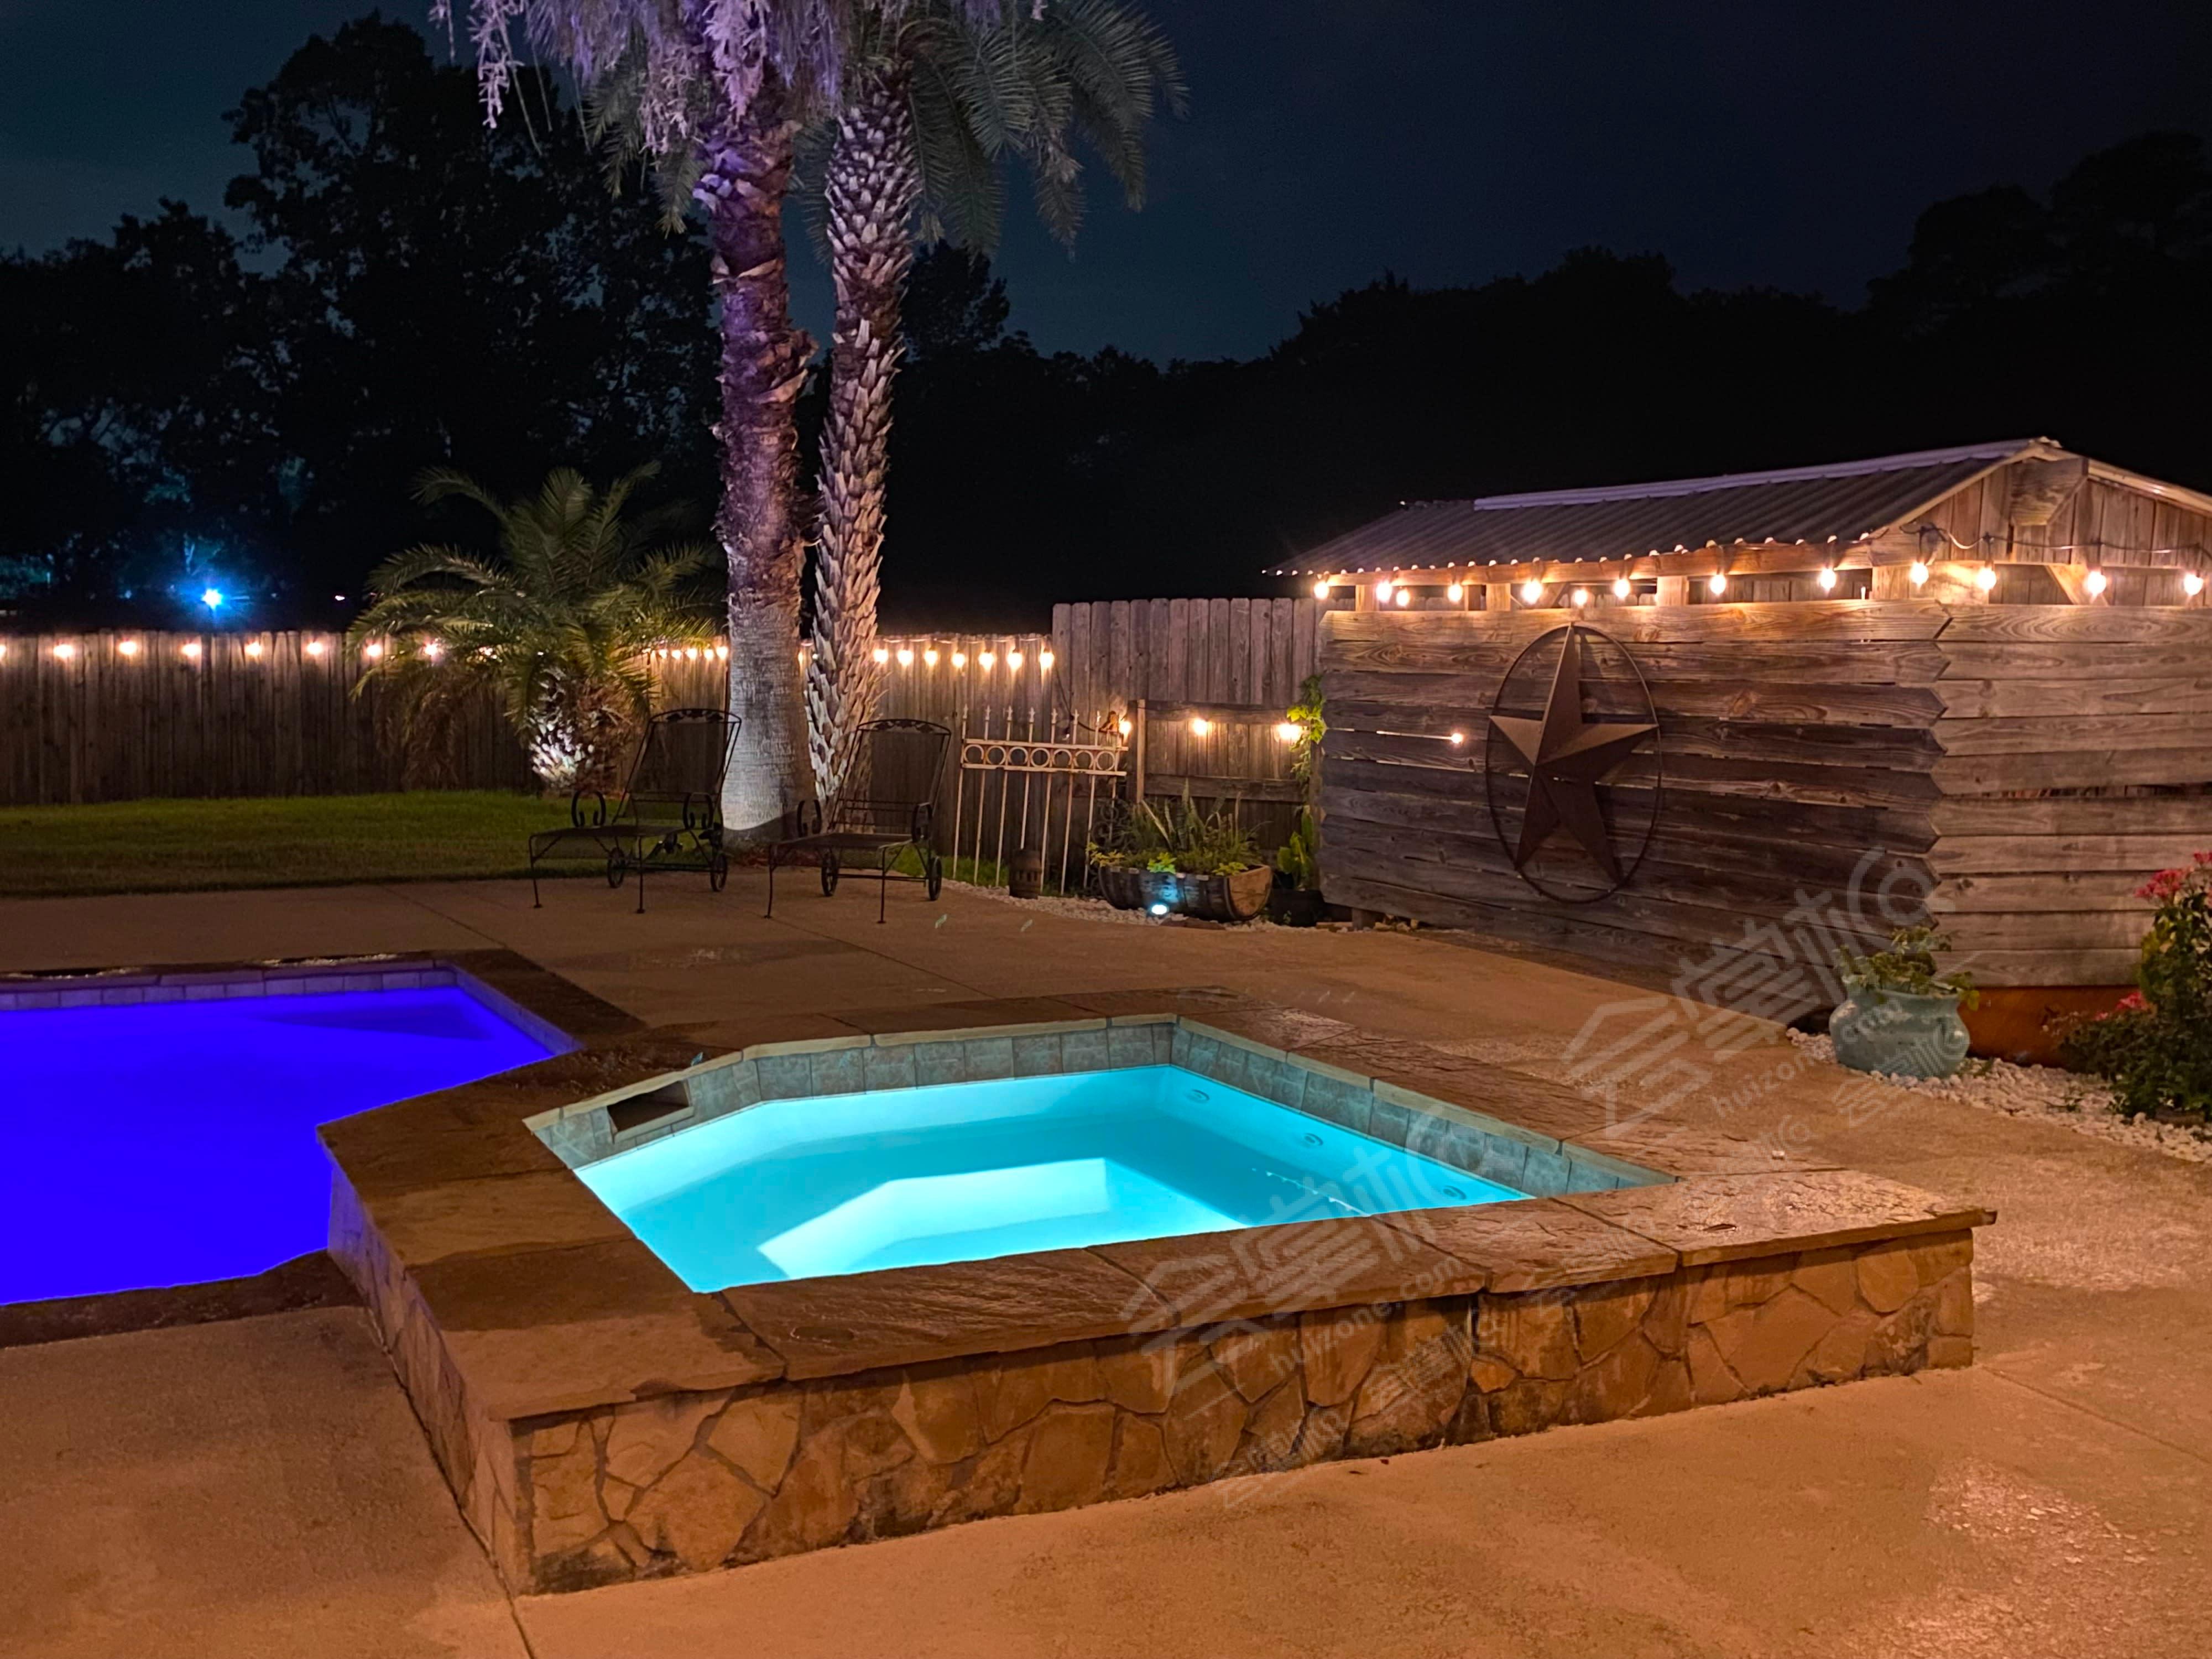 Country Chic poolside with bar and more